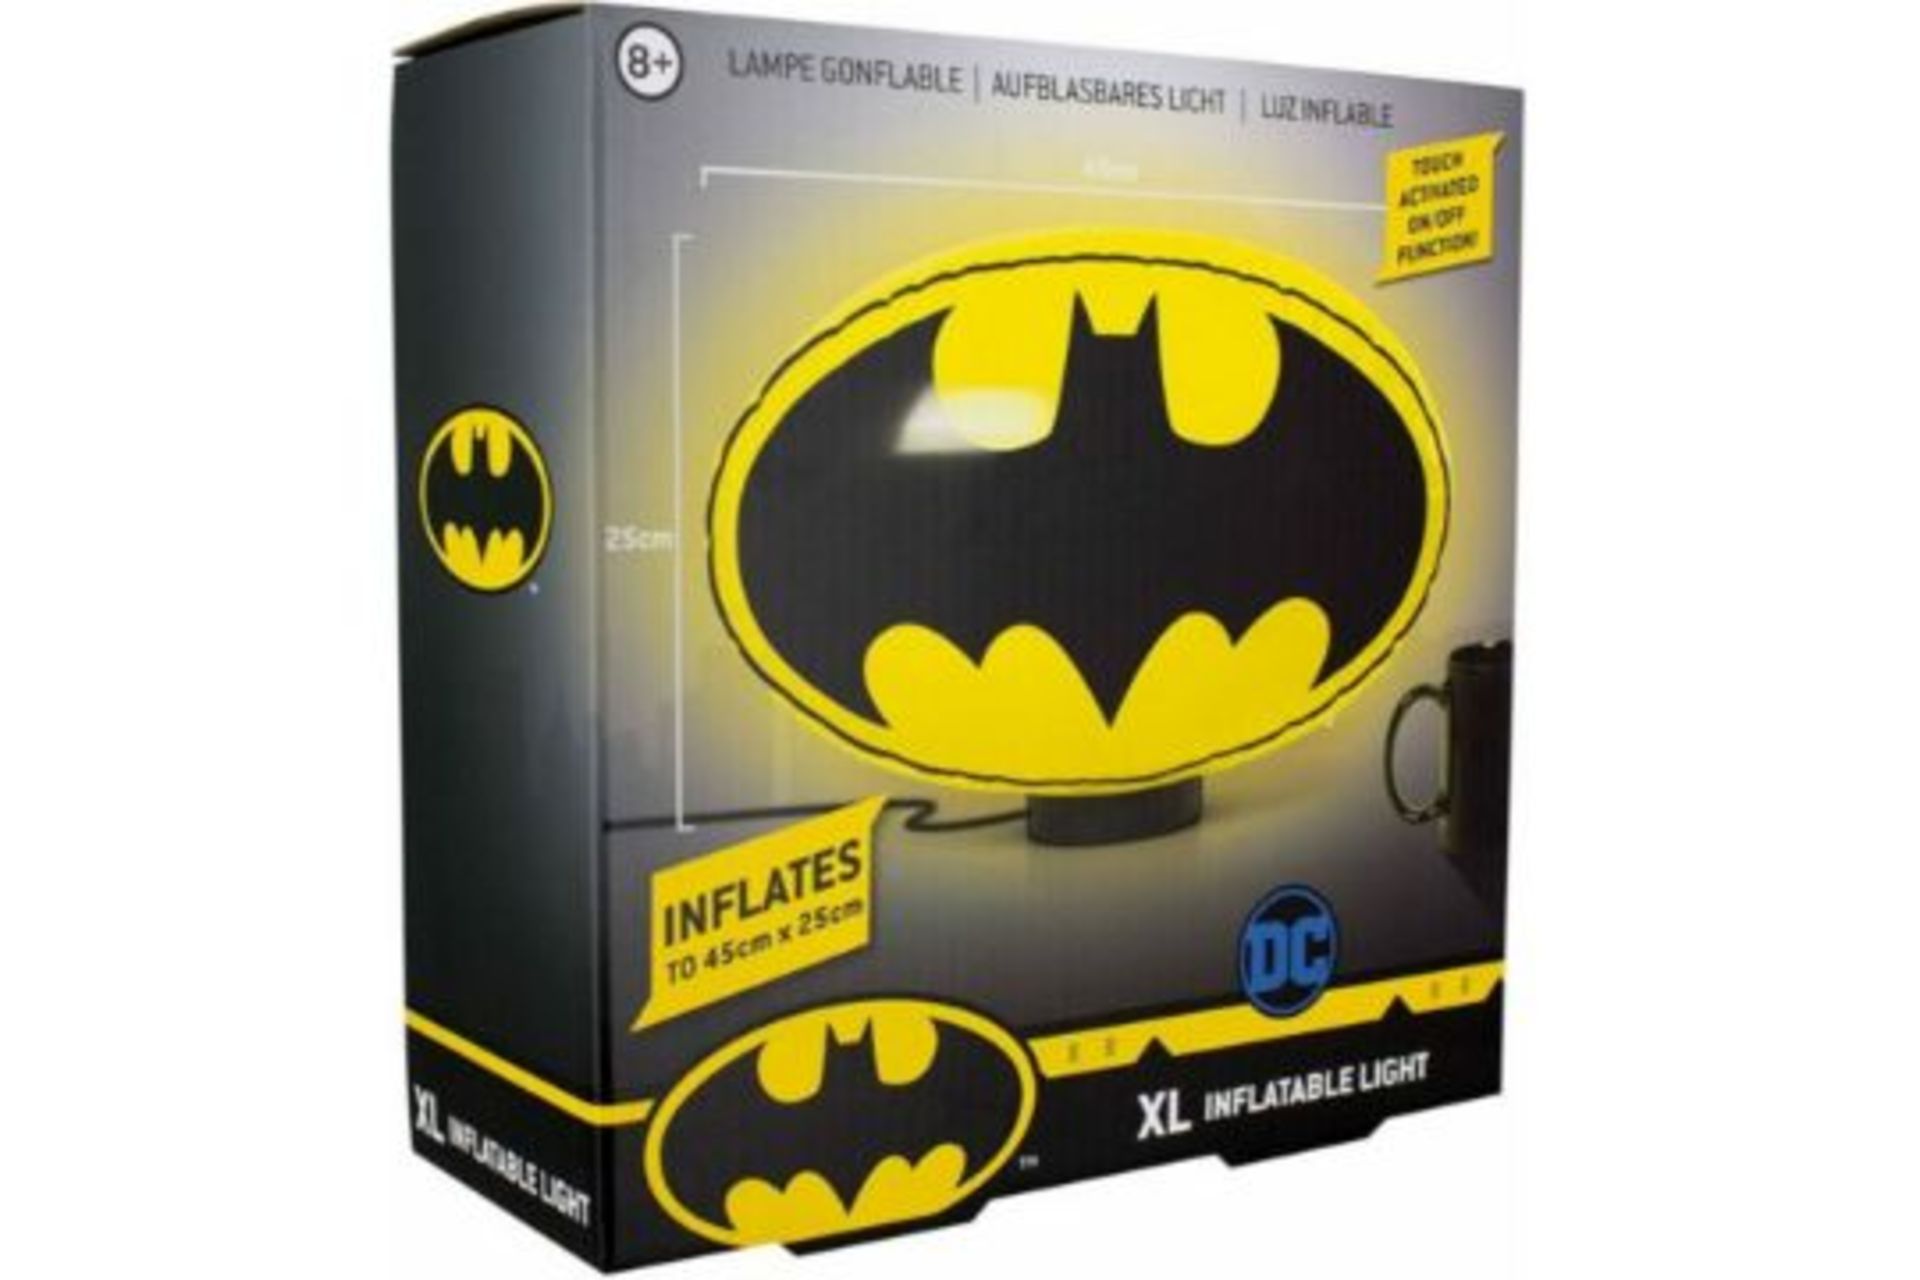 BRAND NEW XL BATMAN LOGO INFLATABLE LIGHT LAMP TOUCH ACTIVATED ON/OFF